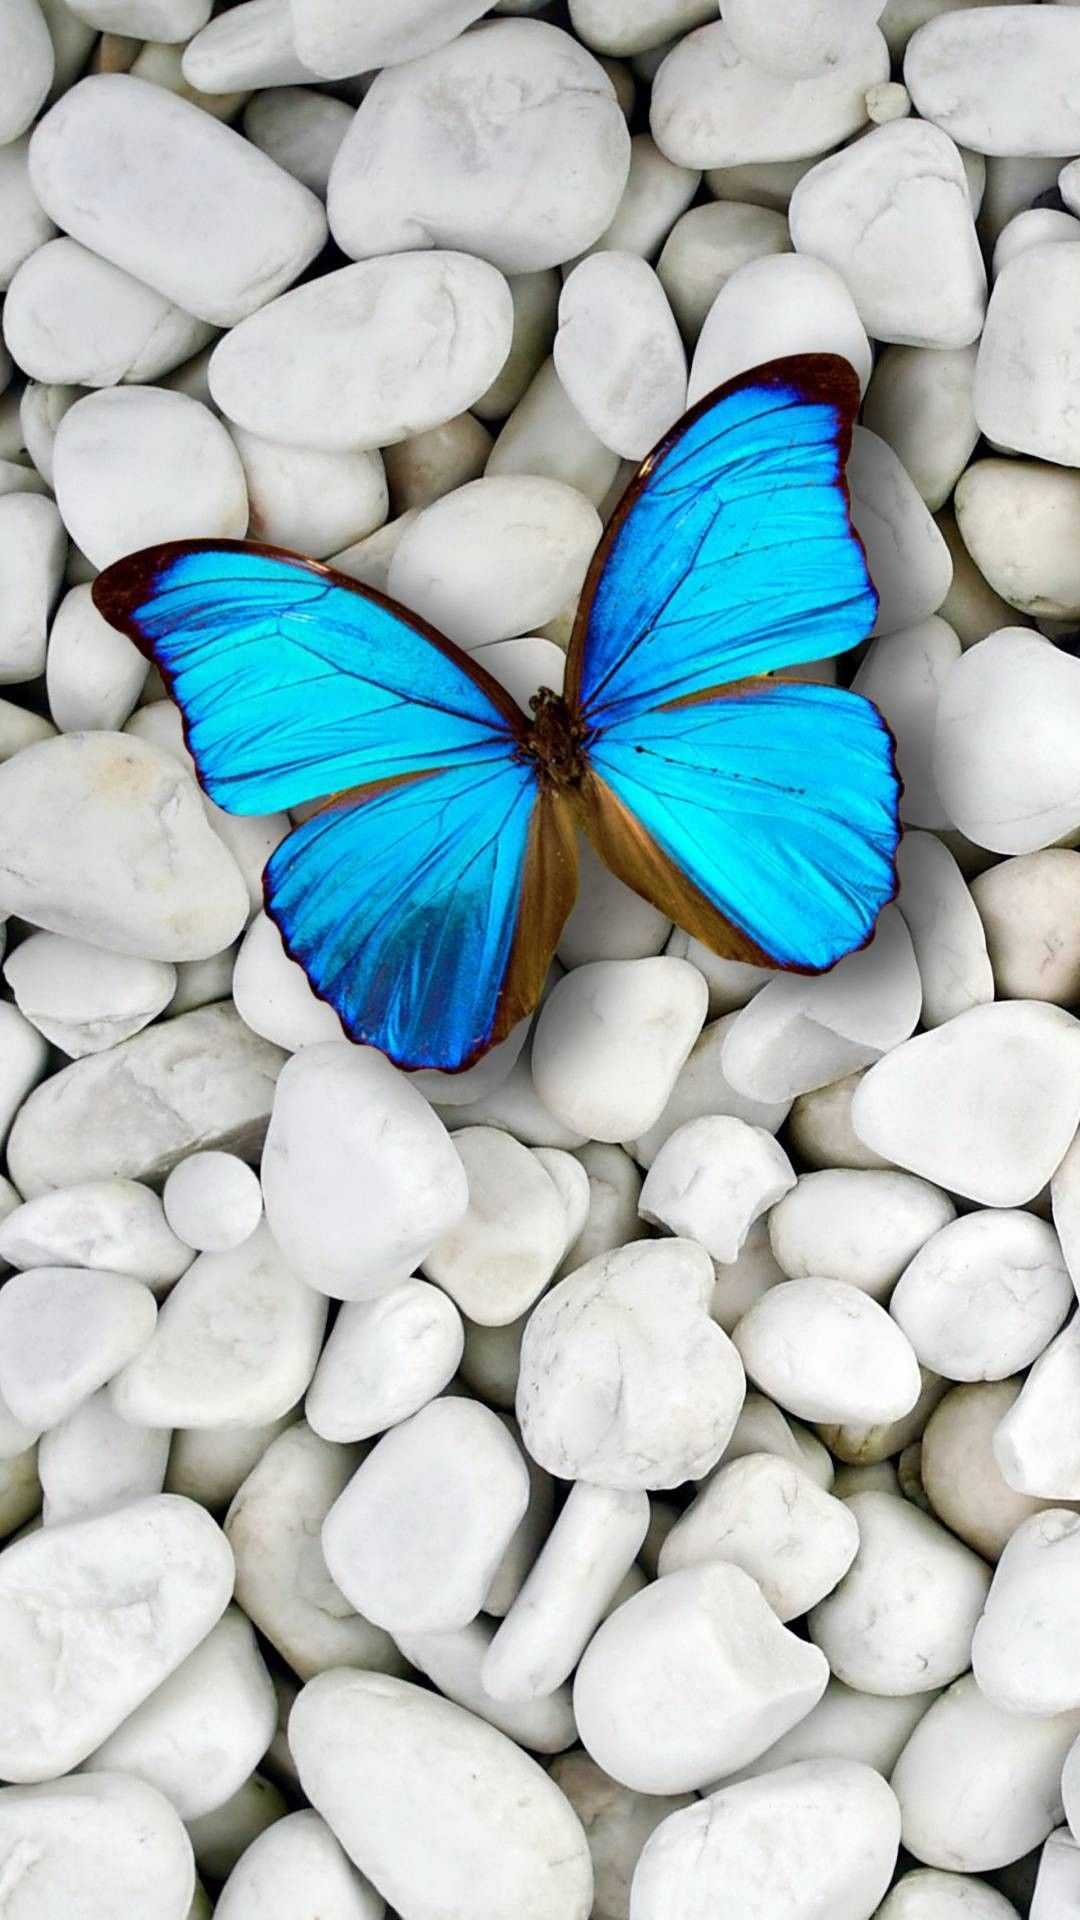 Blue Butterfly Wallpaper - NawPic